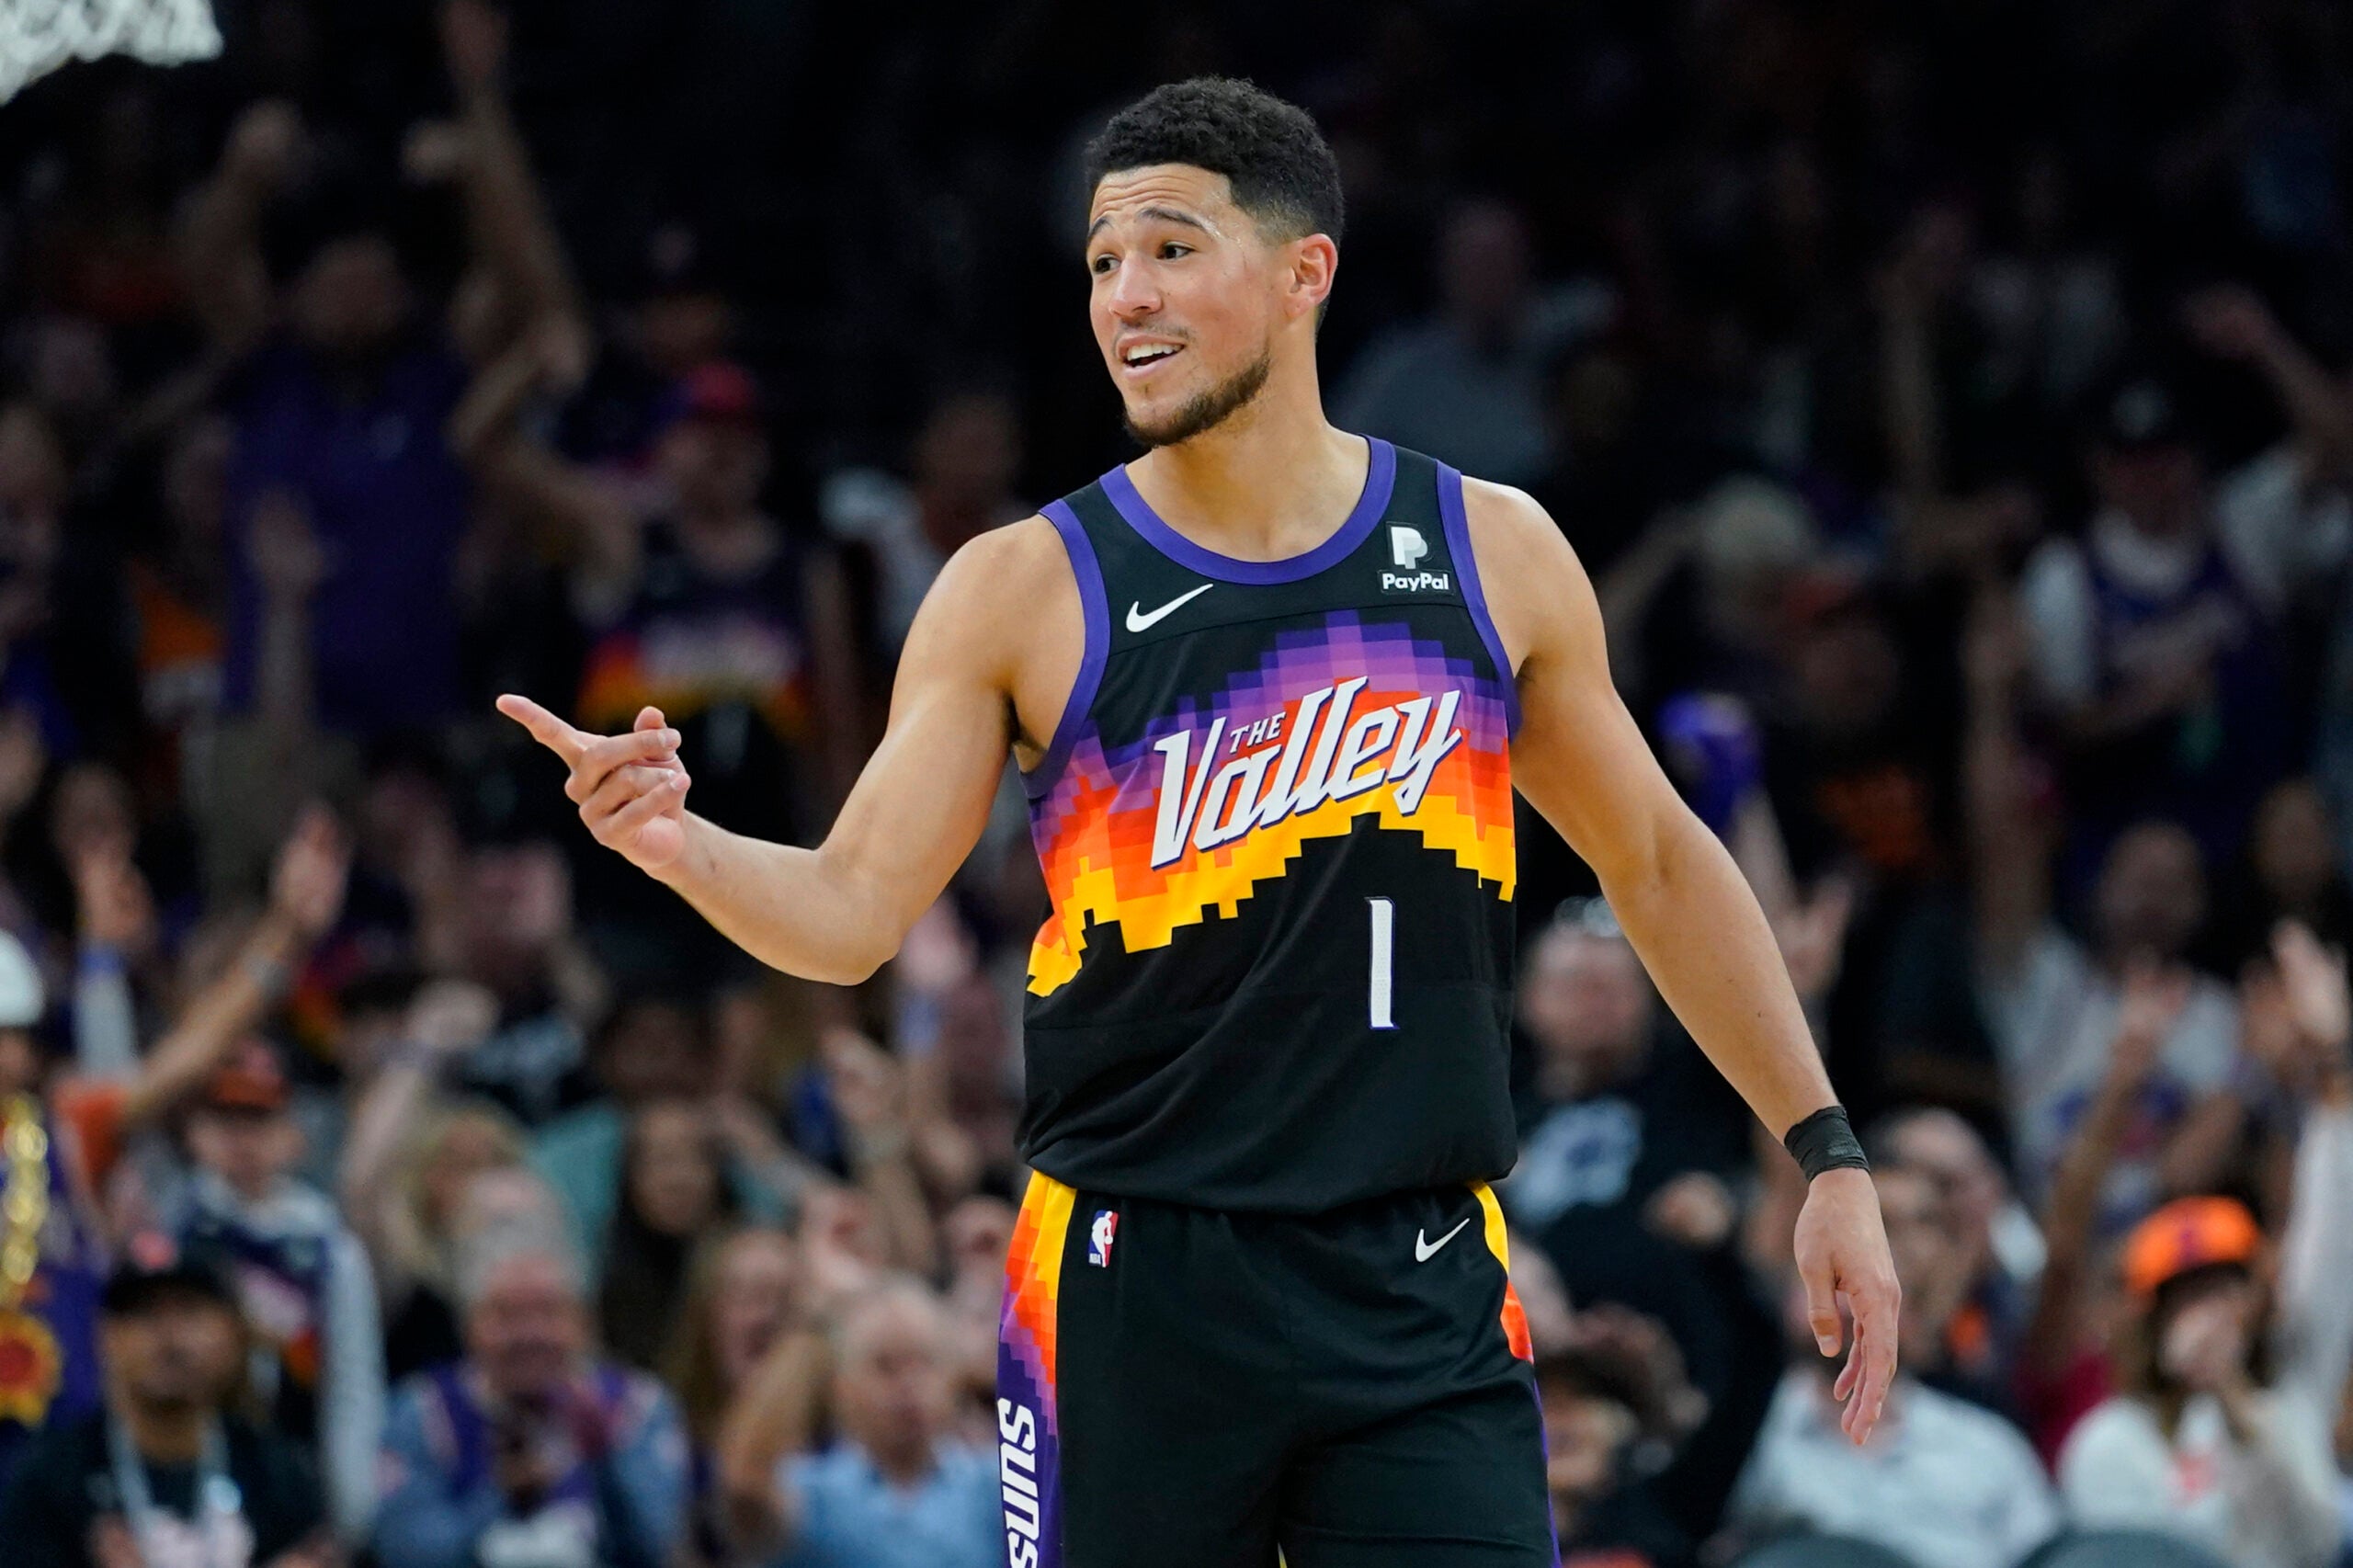 Phoenix Suns guard Devin Booker (1) reacts to a play against the Dallas Mavericks during the second half of Game 1 in the second round of the NBA Western Conference playoff series Monday, May 2, 2022, in Phoenix.